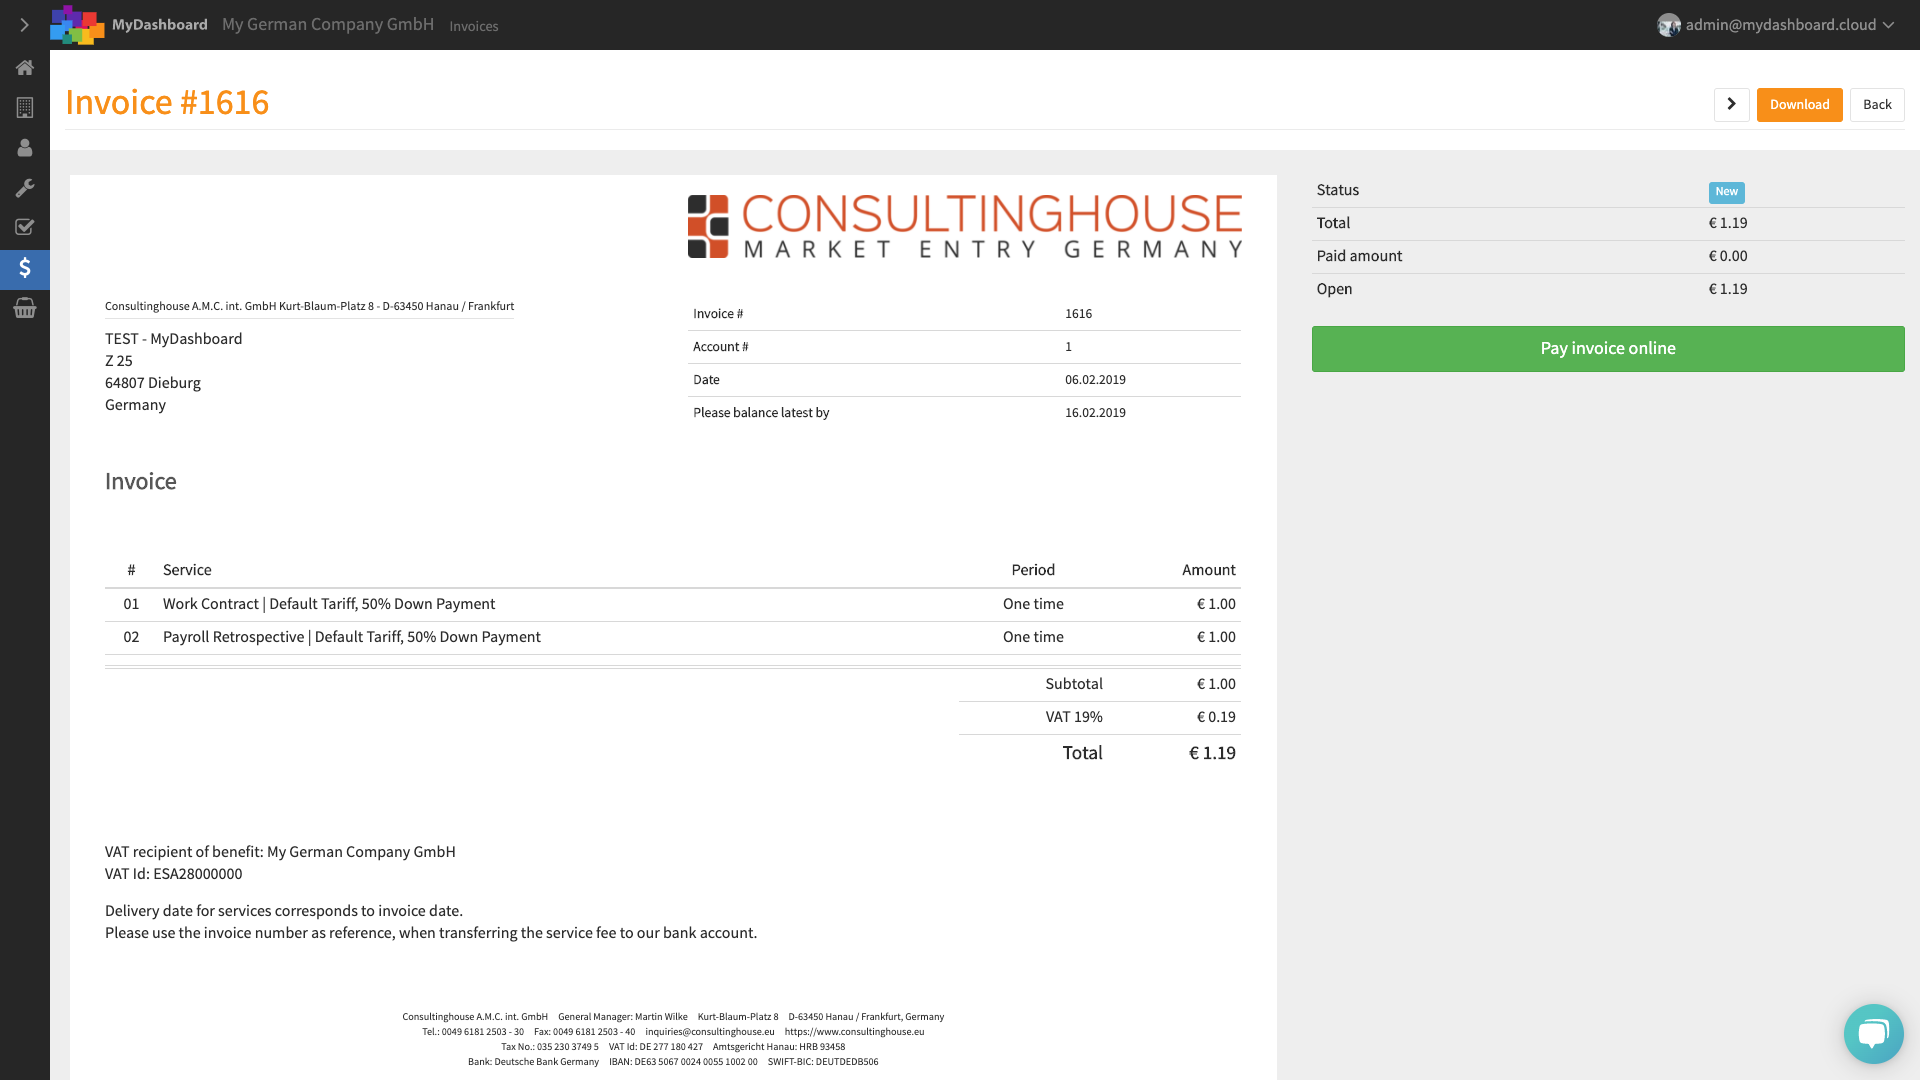 Consultinghouse-Digital-Intercompany-Accounting-Service-Germany